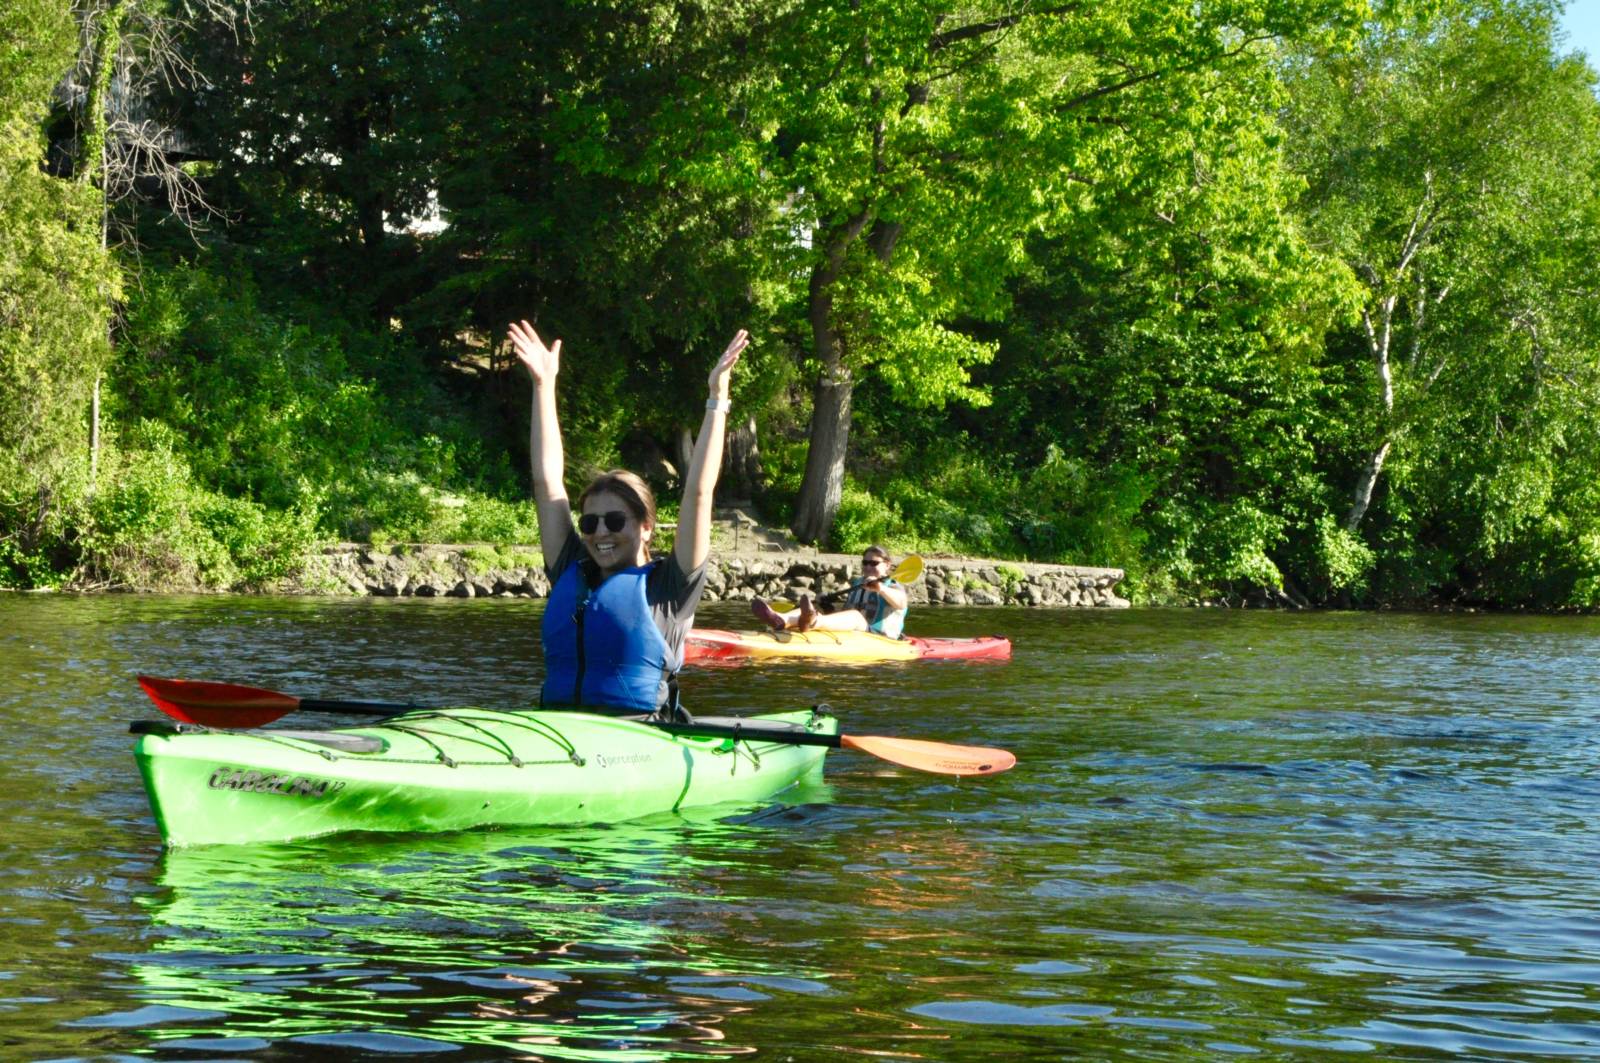 a young person in a kayak on the River throws their hands in the air and smiles